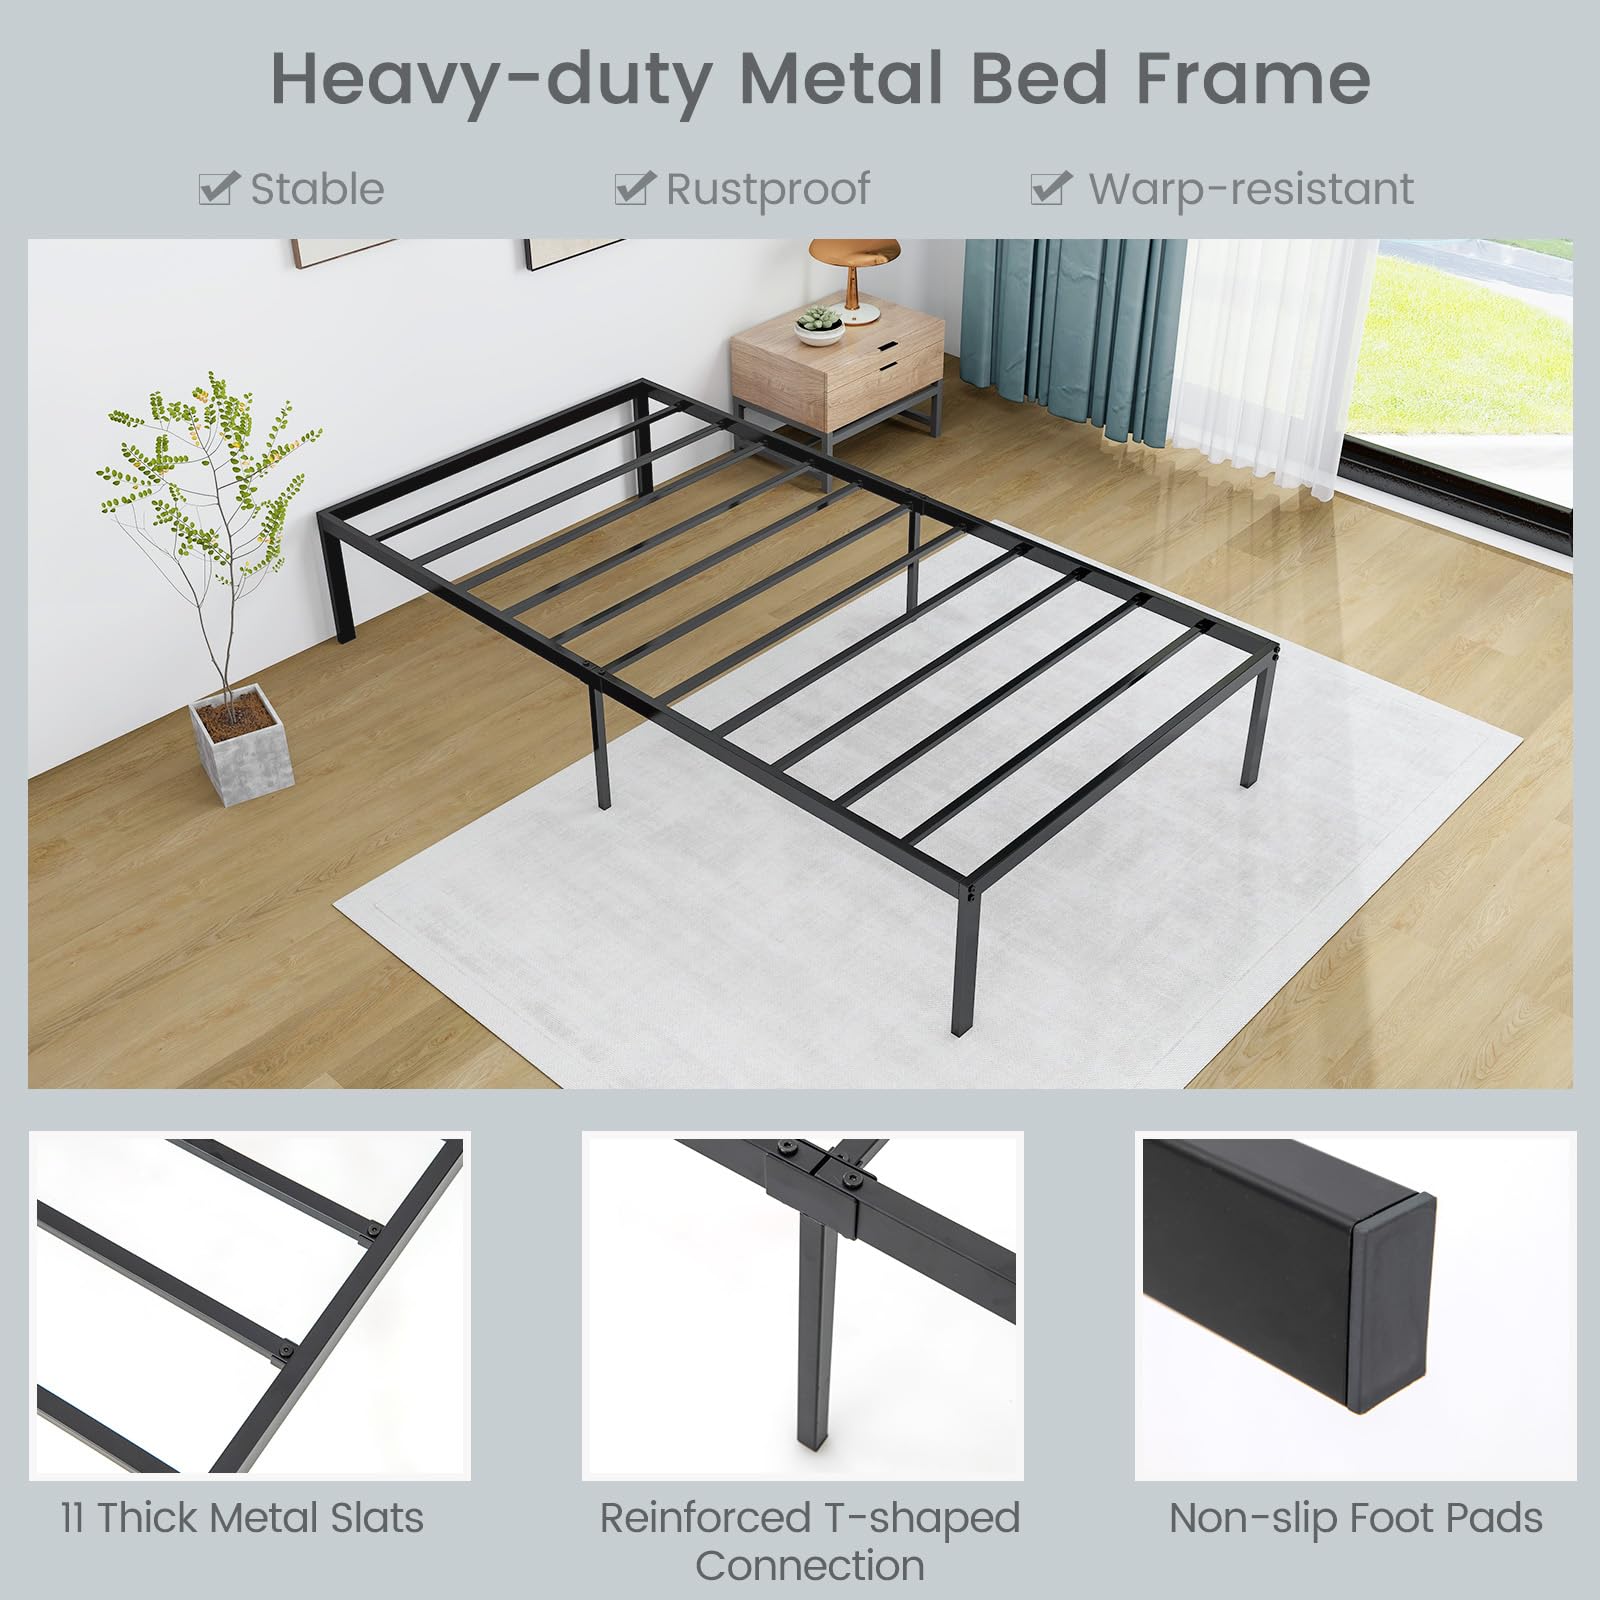 Giantex Twin Bed Frame, 14 Inch Metal Platform Bed with Under Bed Storage Space, Heavy-Duty Steel Slat Mattress Foundation